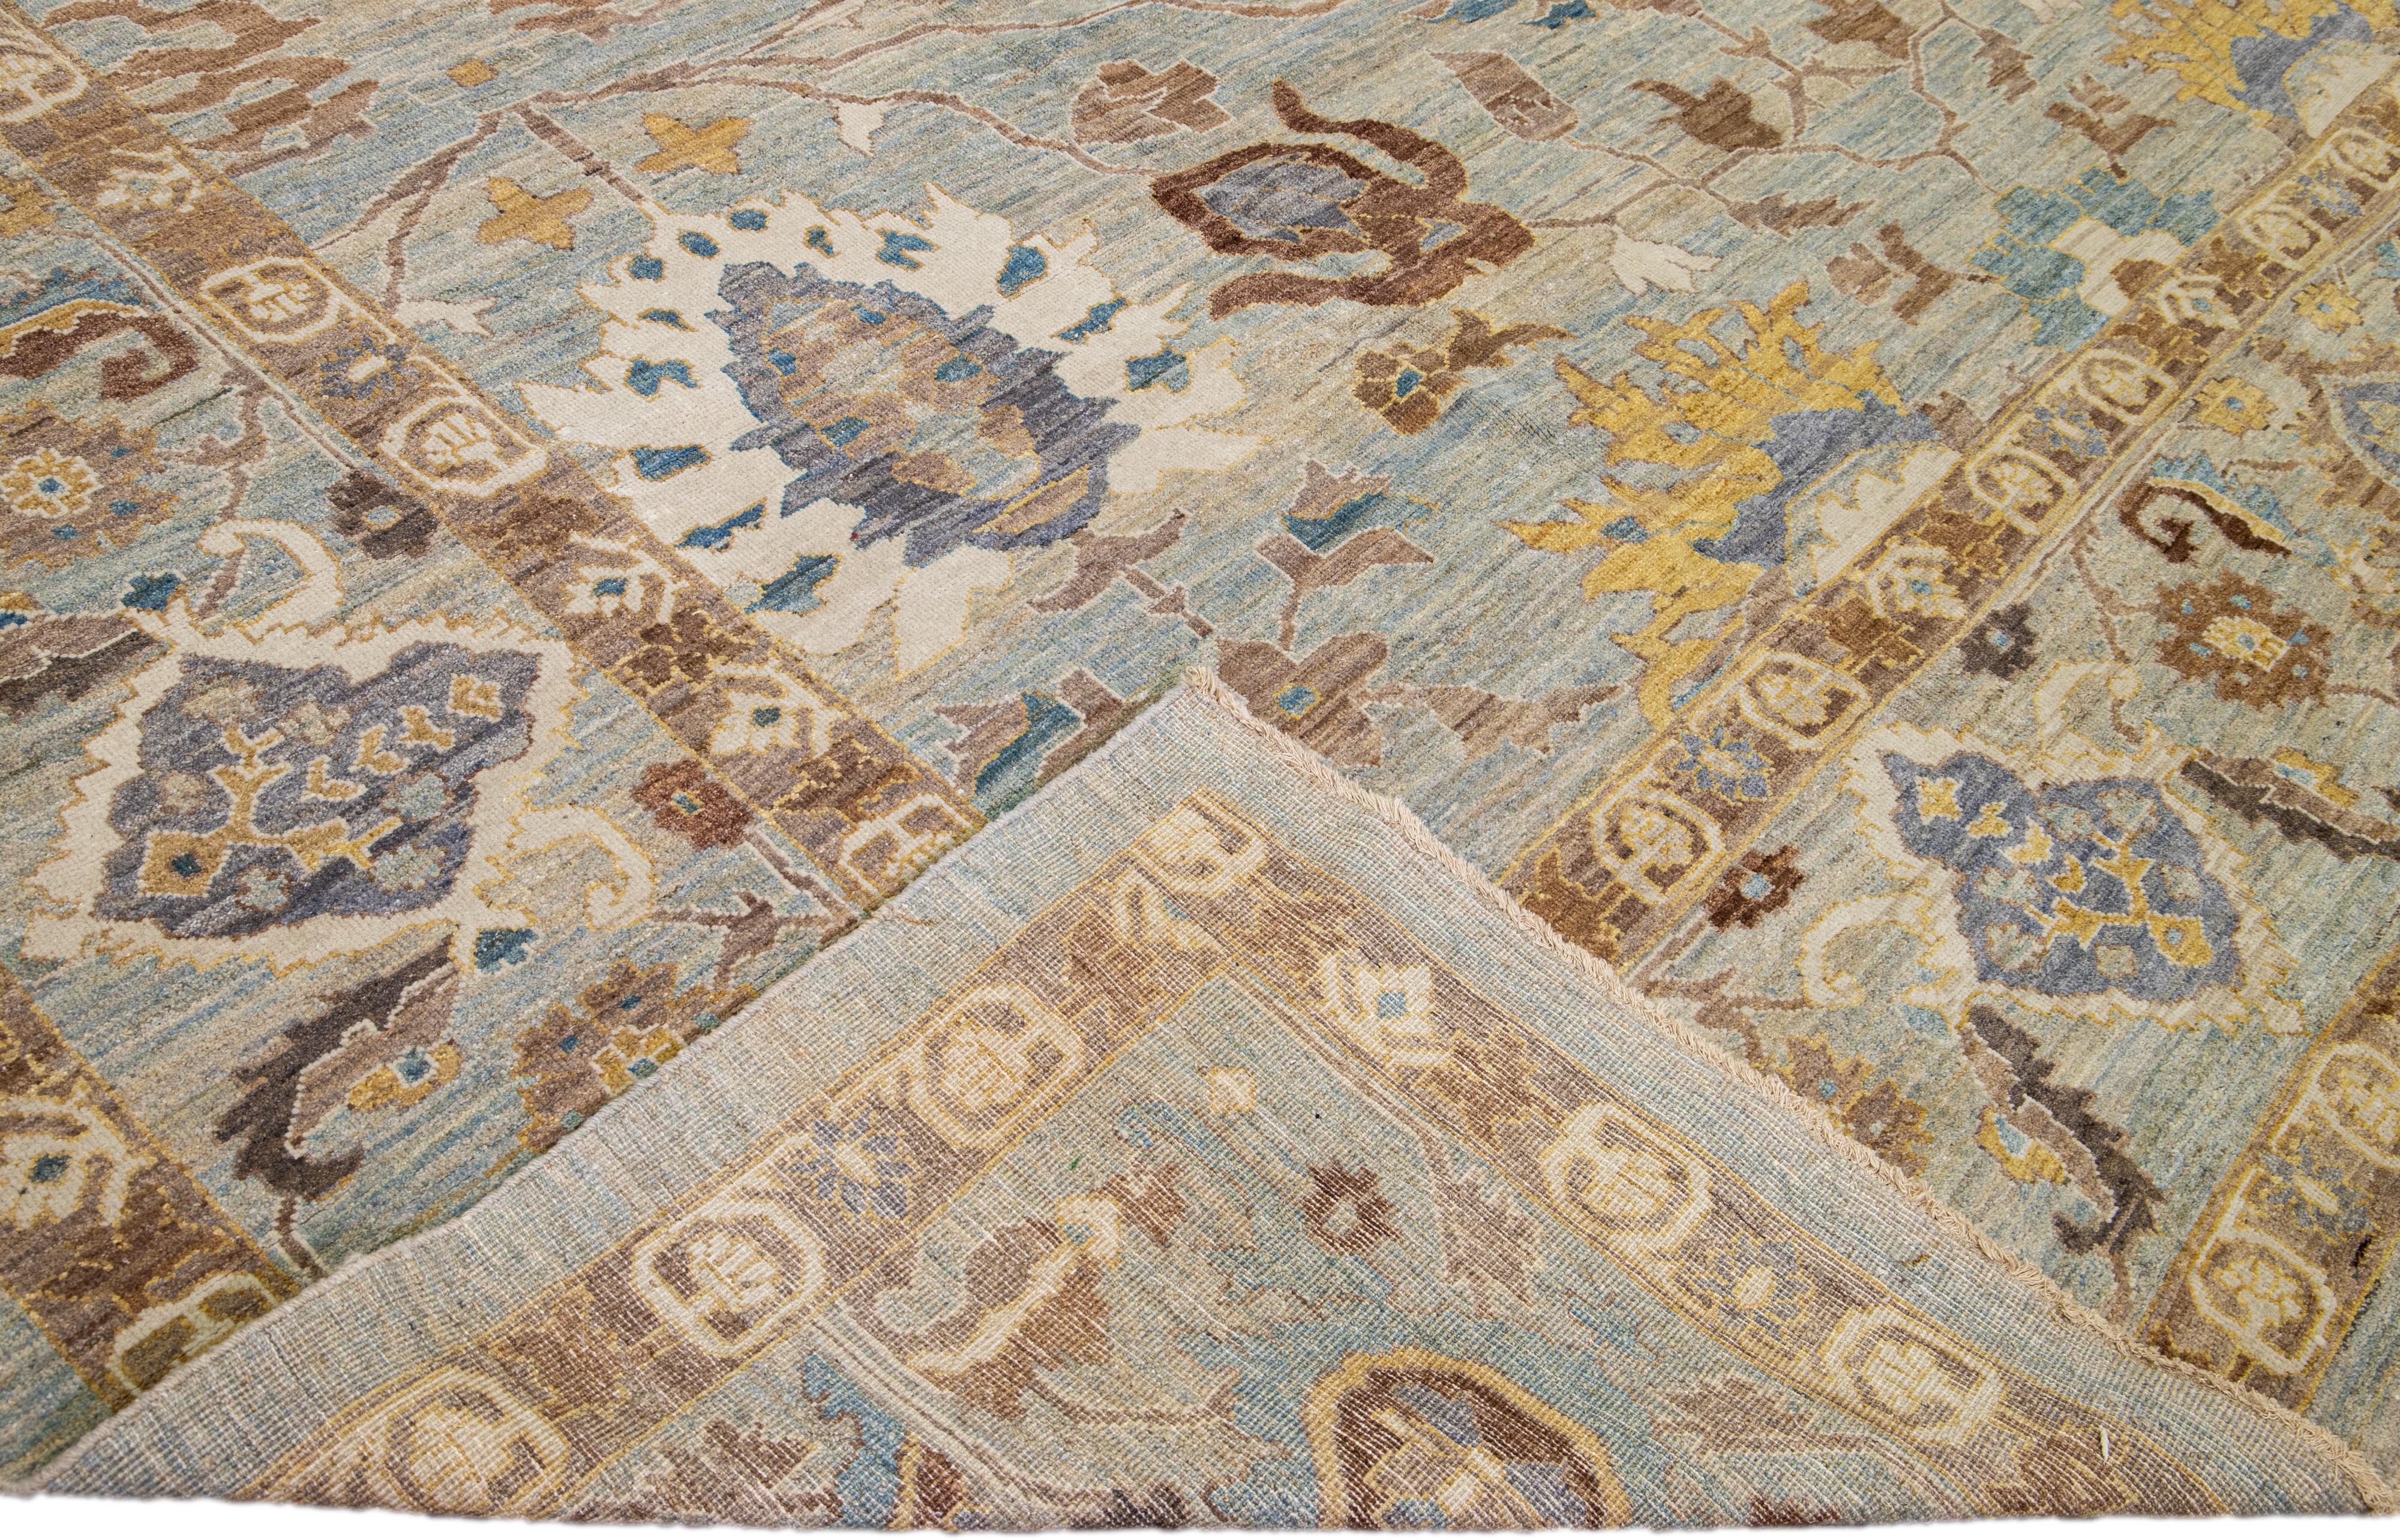 Beautiful modern Sultanabad hand-knotted wool rug with a blue and gray field. This Sultanabad rug has brown, goldenrod, and blue accents in a gorgeous all-over Classic floral pattern design.

This rug measures: 14'3